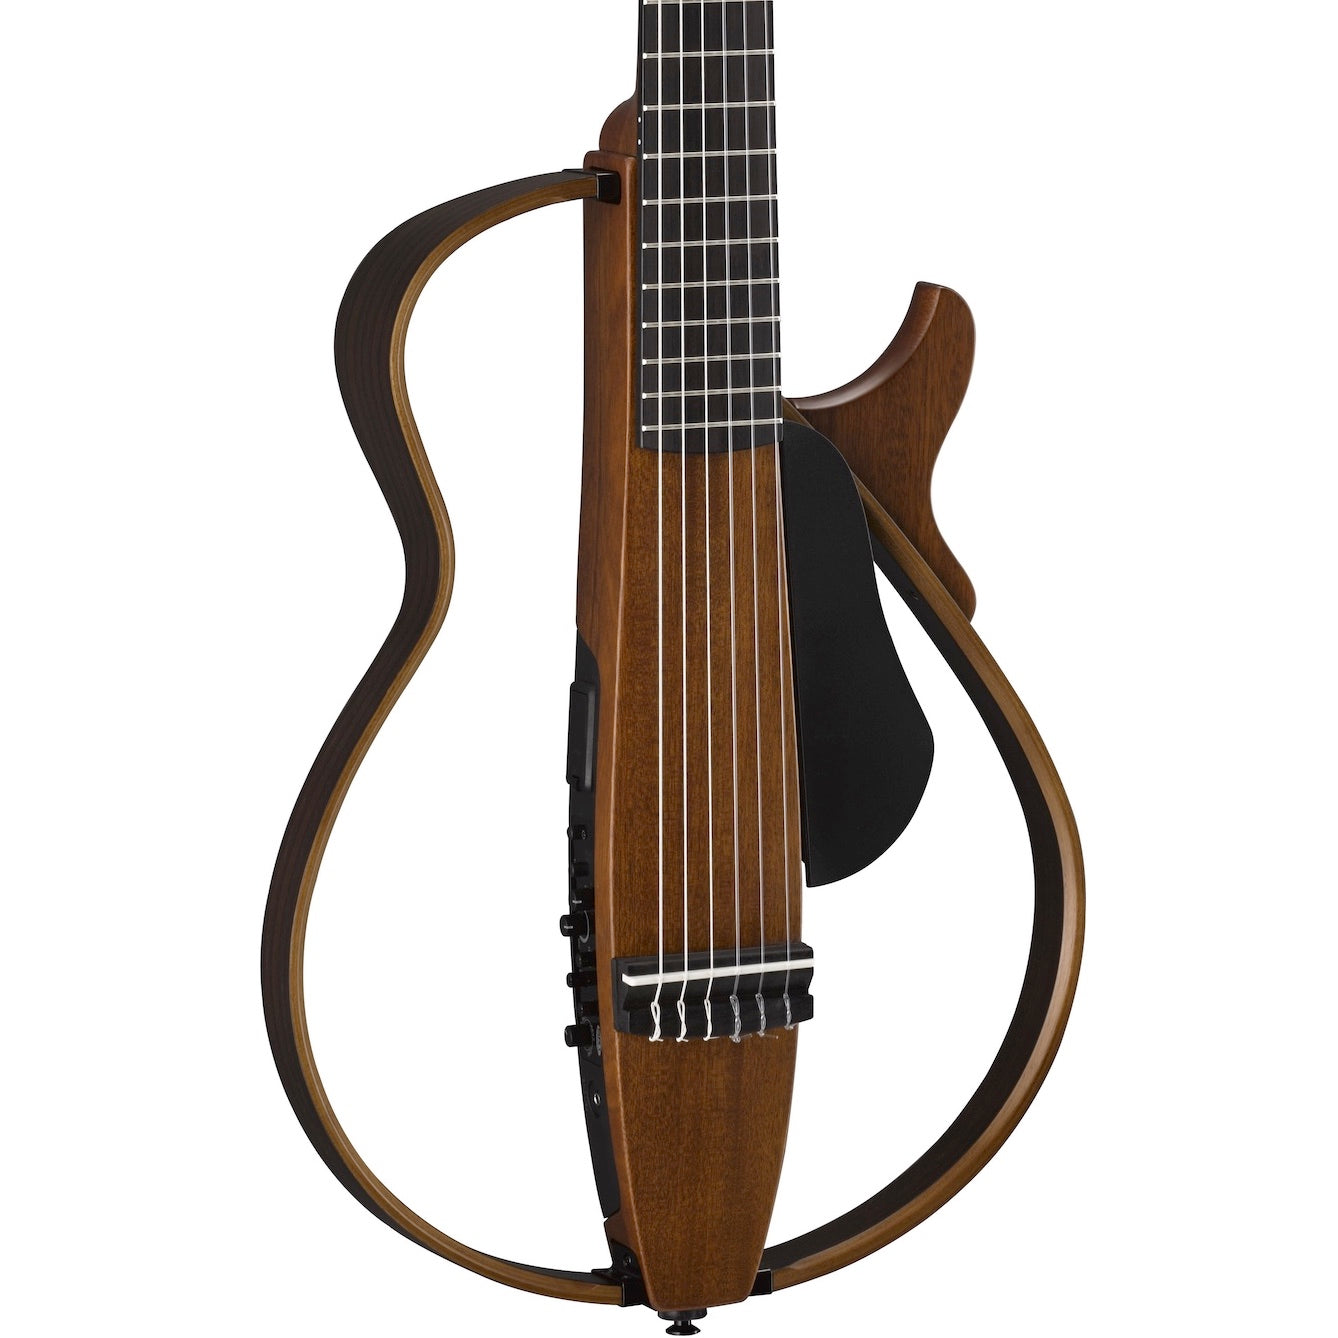 Yamaha SLG200N Silent Guitar Nylon Natural | Music Experience | Shop Online | South Africa